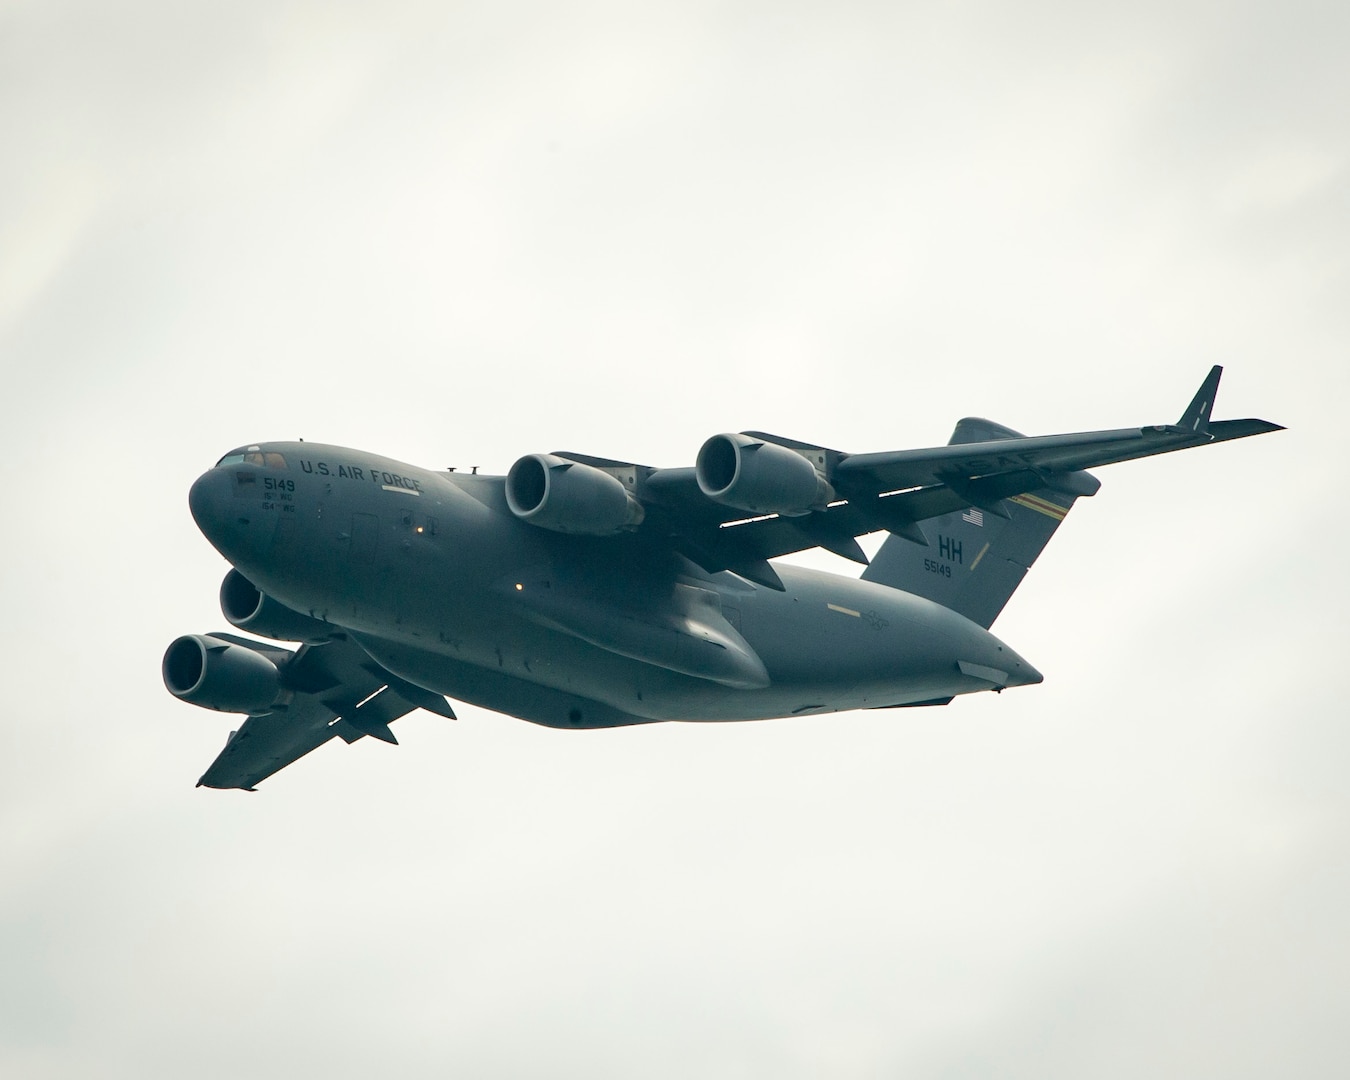 A U.S. Air Force C-17 Globemaster III from the 15th Wing at Joint Base Pearl Harbor-Hickam, Hawaii, practices its aerial demonstration routine prior to the Singapore International Airshow, at Changi International Airport Singapore, Feb. 15, 2016. Through participation in airshows and regional events, the U.S. demonstrates its commitment to the security of the Indo-Asia-Pacific region, promotes equipment interoperability, displays the flexible combat capabilities of the U.S. military, and creates lasting relationships with international audiences to strengthen the bonds that support partnership building throughout the Indo-Asia-Pacific region. (U.S. Air Force photo by Capt. Raymond Geoffroy/Released)